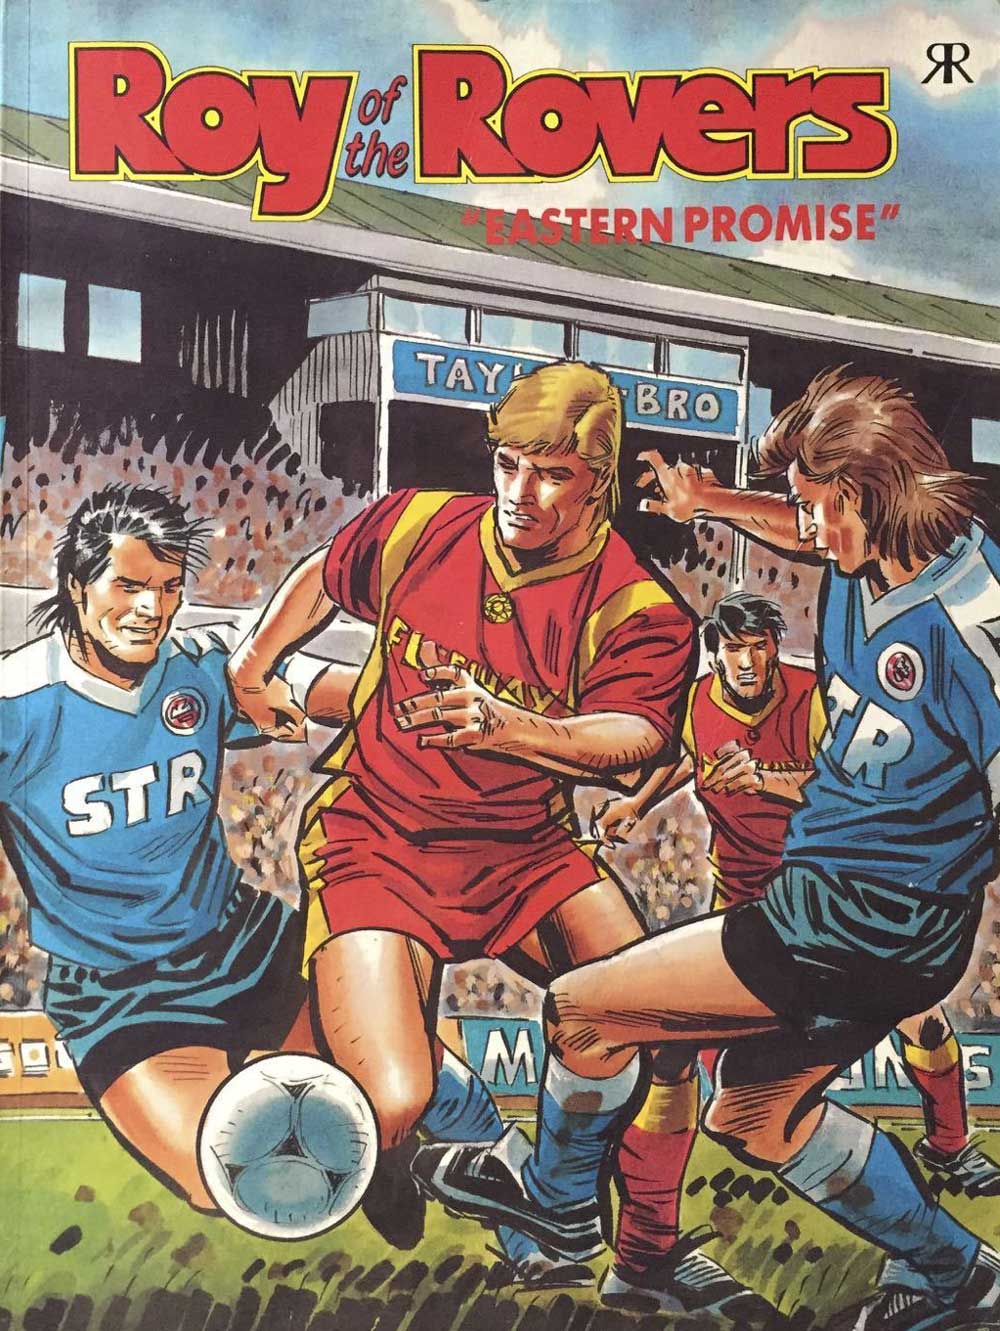 One of many Roy of the Rovers spin-off books, detailed here by Richard Sheaf